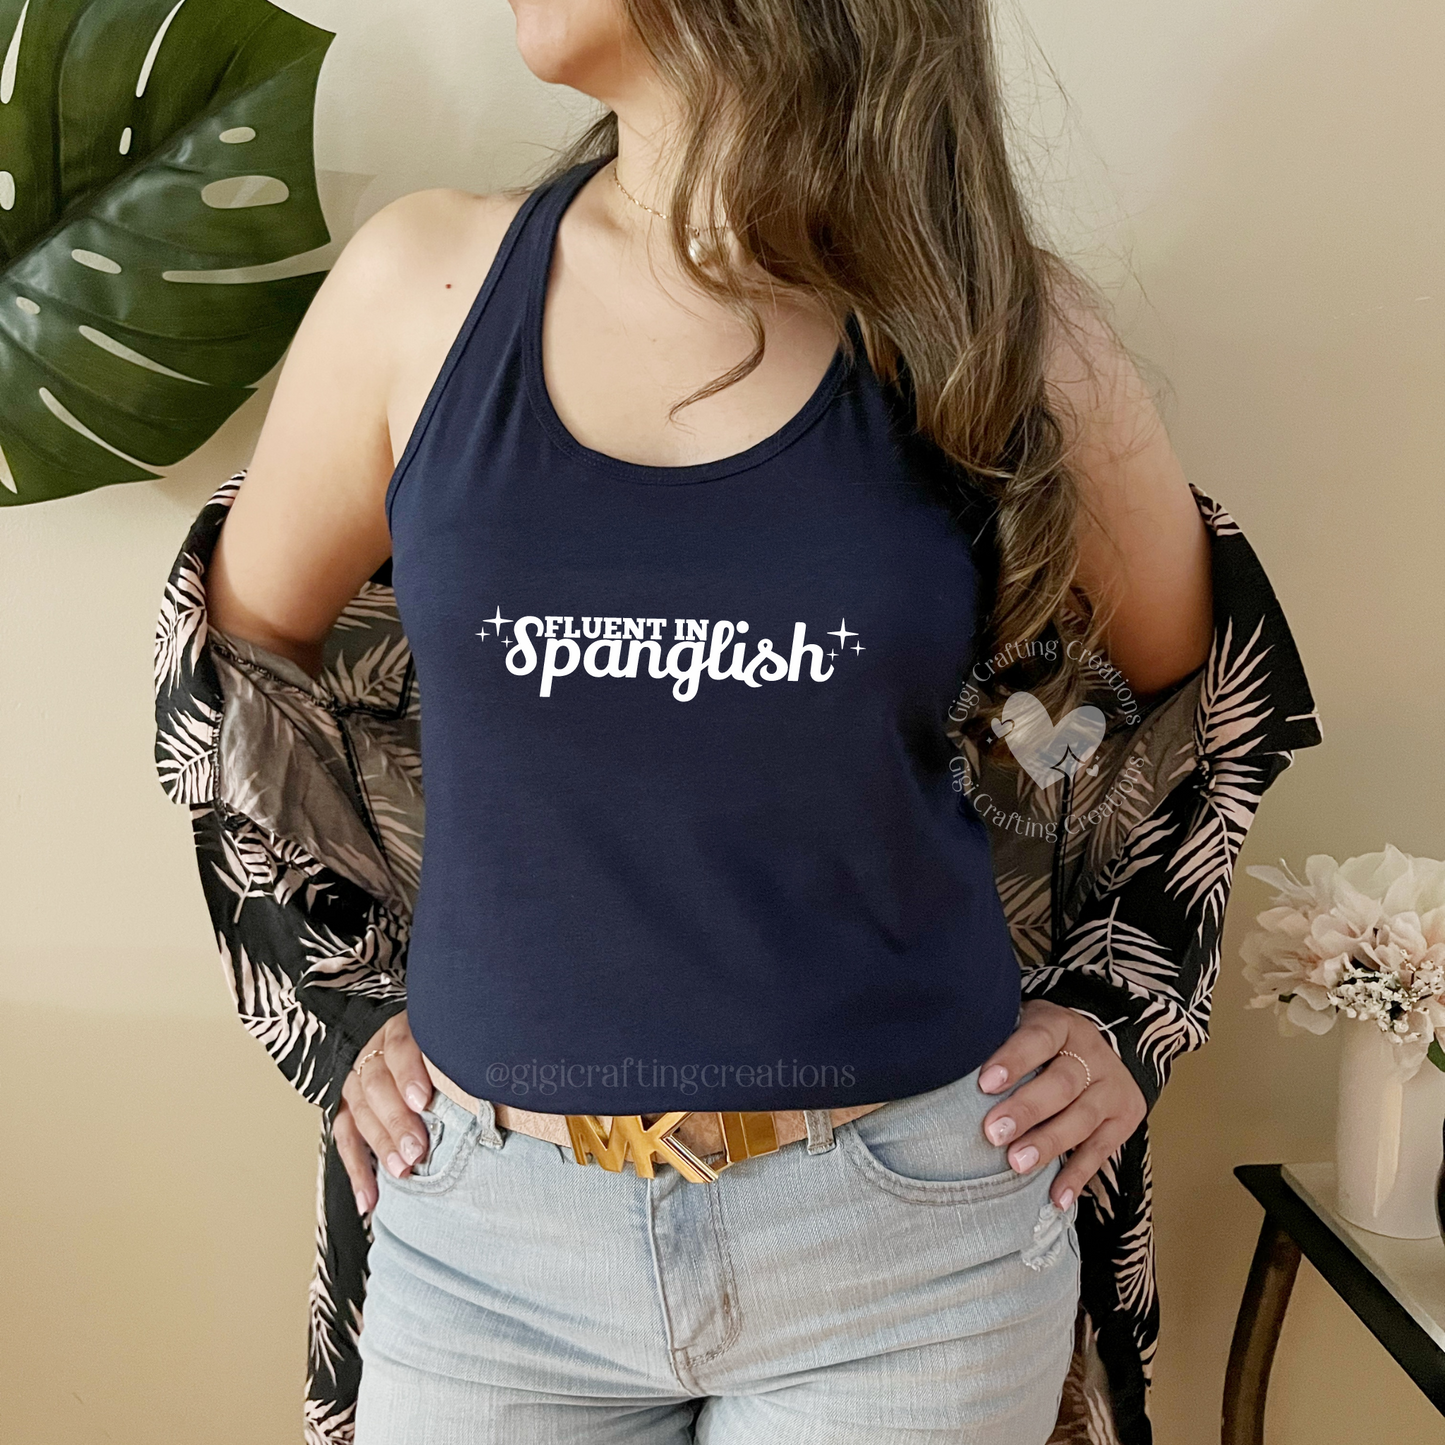 Fluent in Spanglish Tank Top